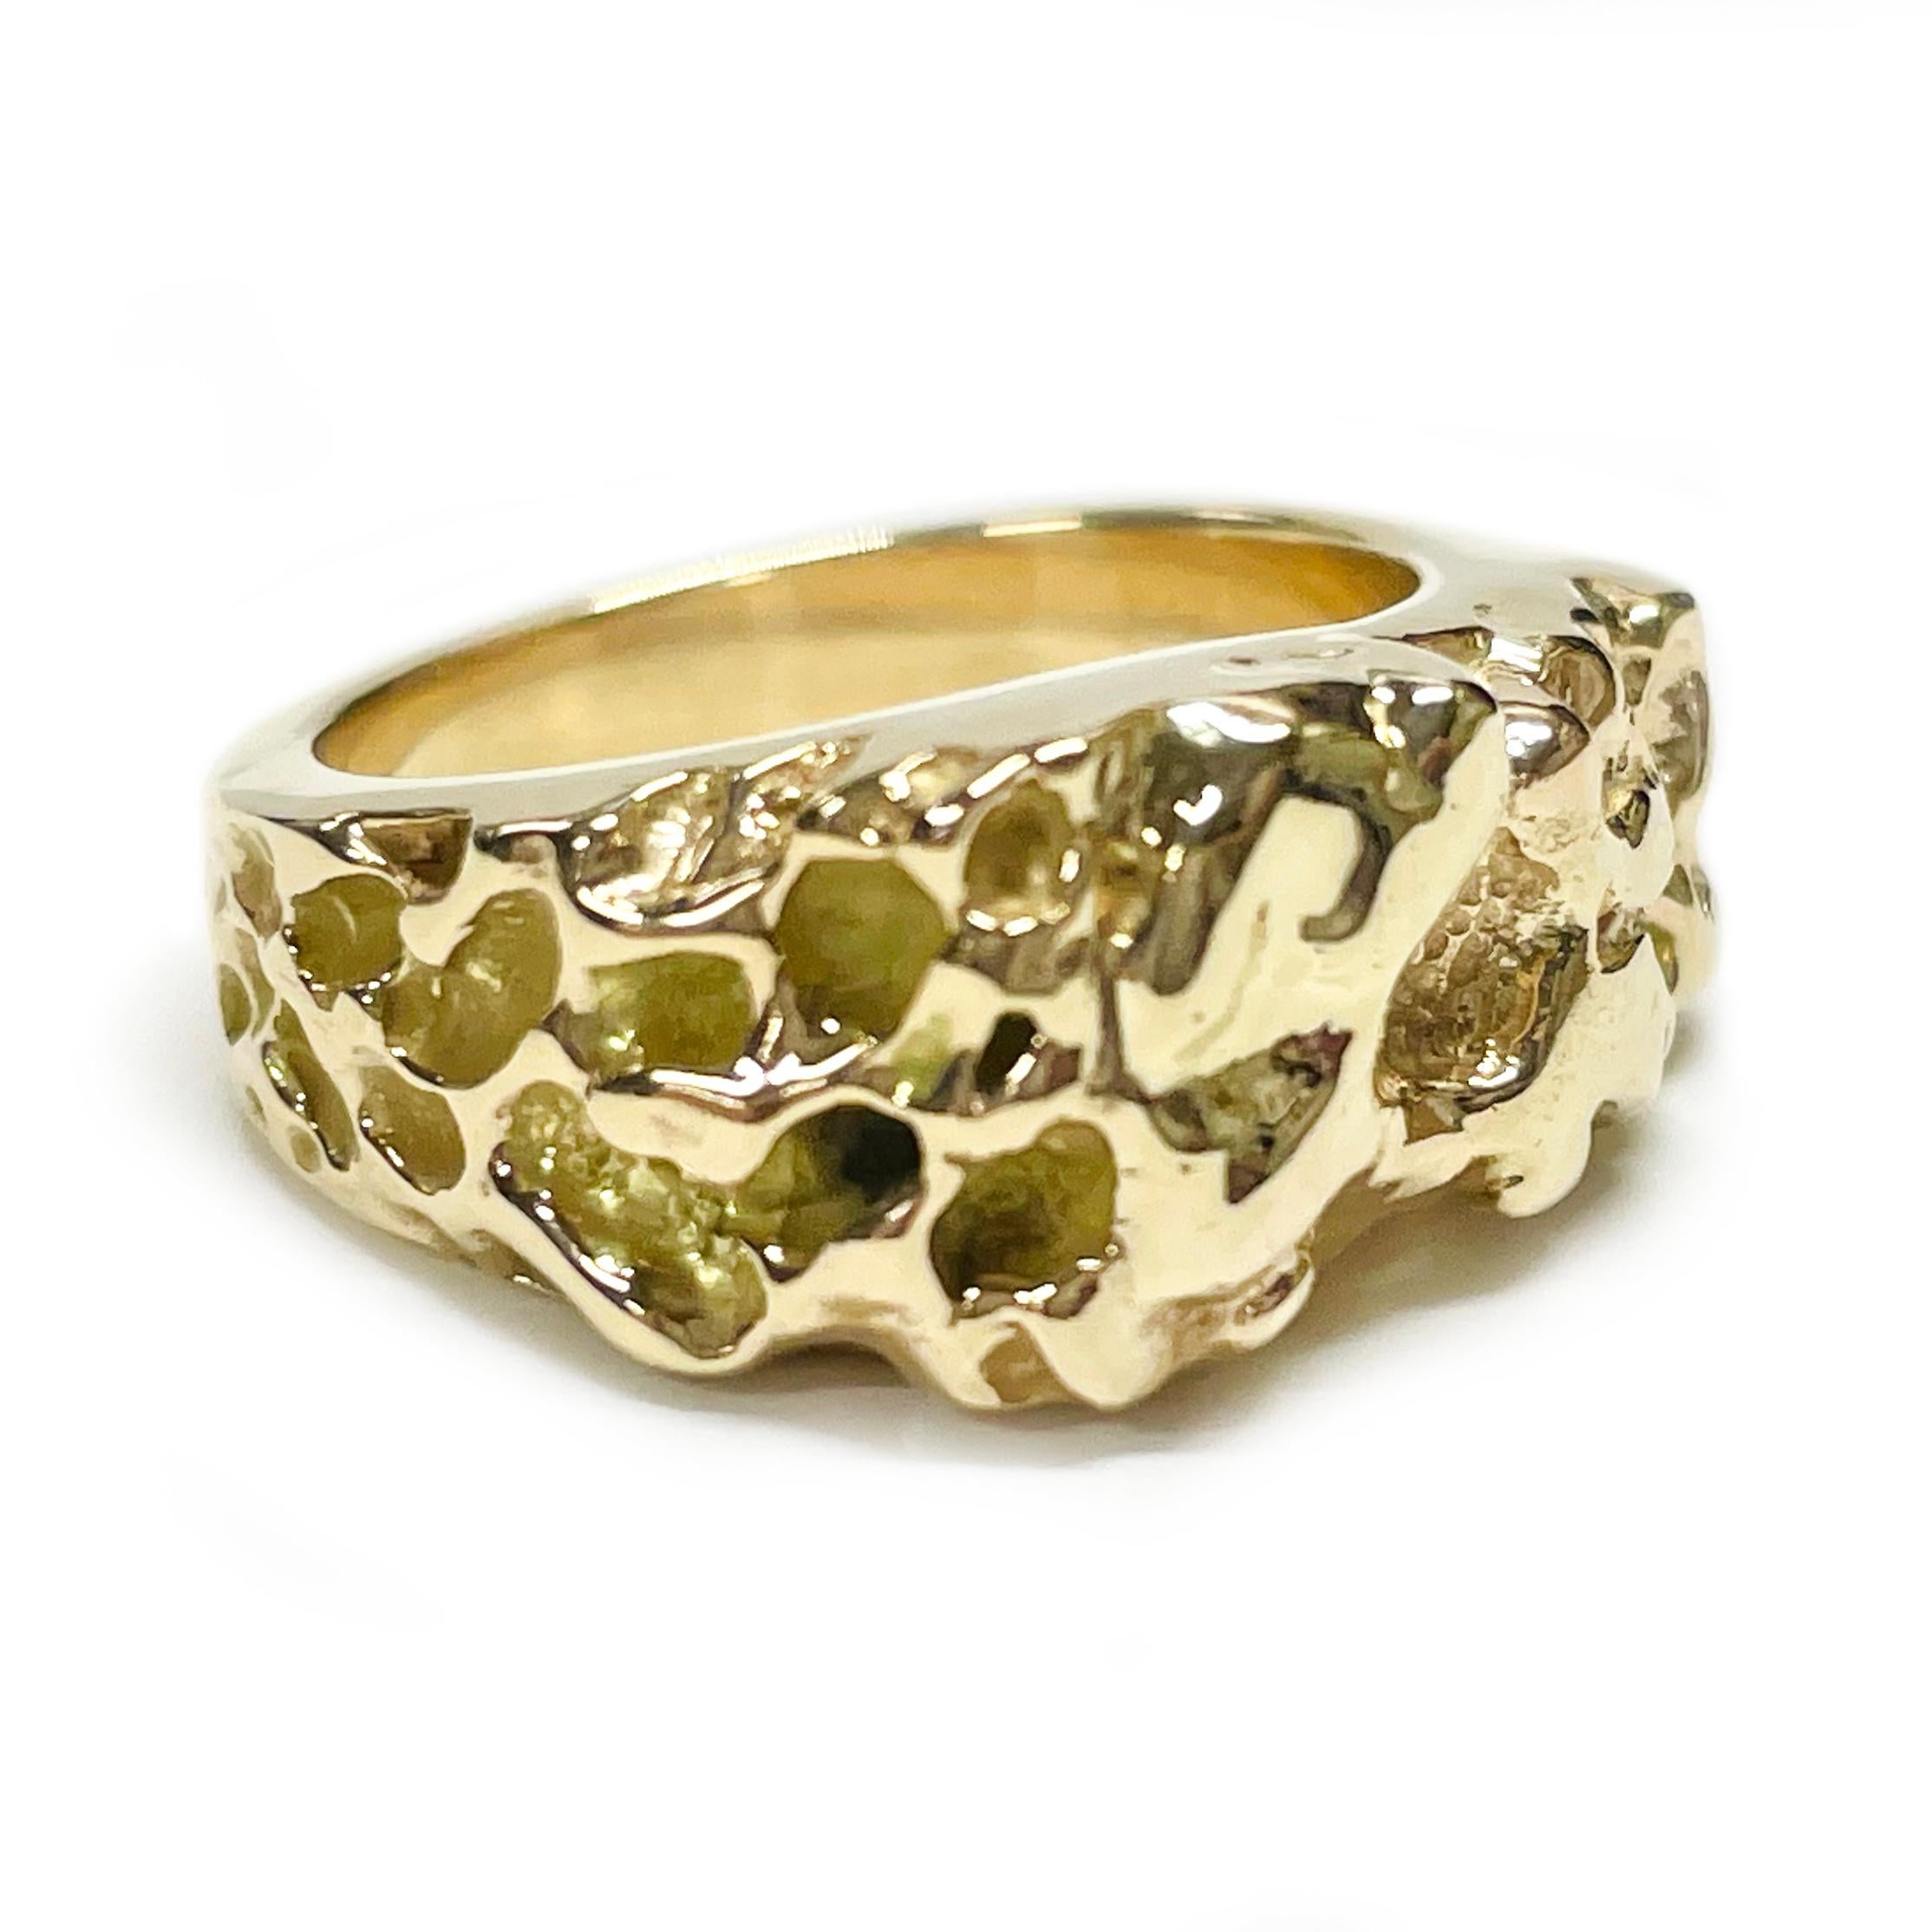 14 Karat Yellow Gold Nugget Ring. The ring features a retro look with nugget texture around a third of the ring, the rest of the ring has a smooth shiny finish. The ring size is 6 3/4. The total weight of the ring is 15.3 grams.